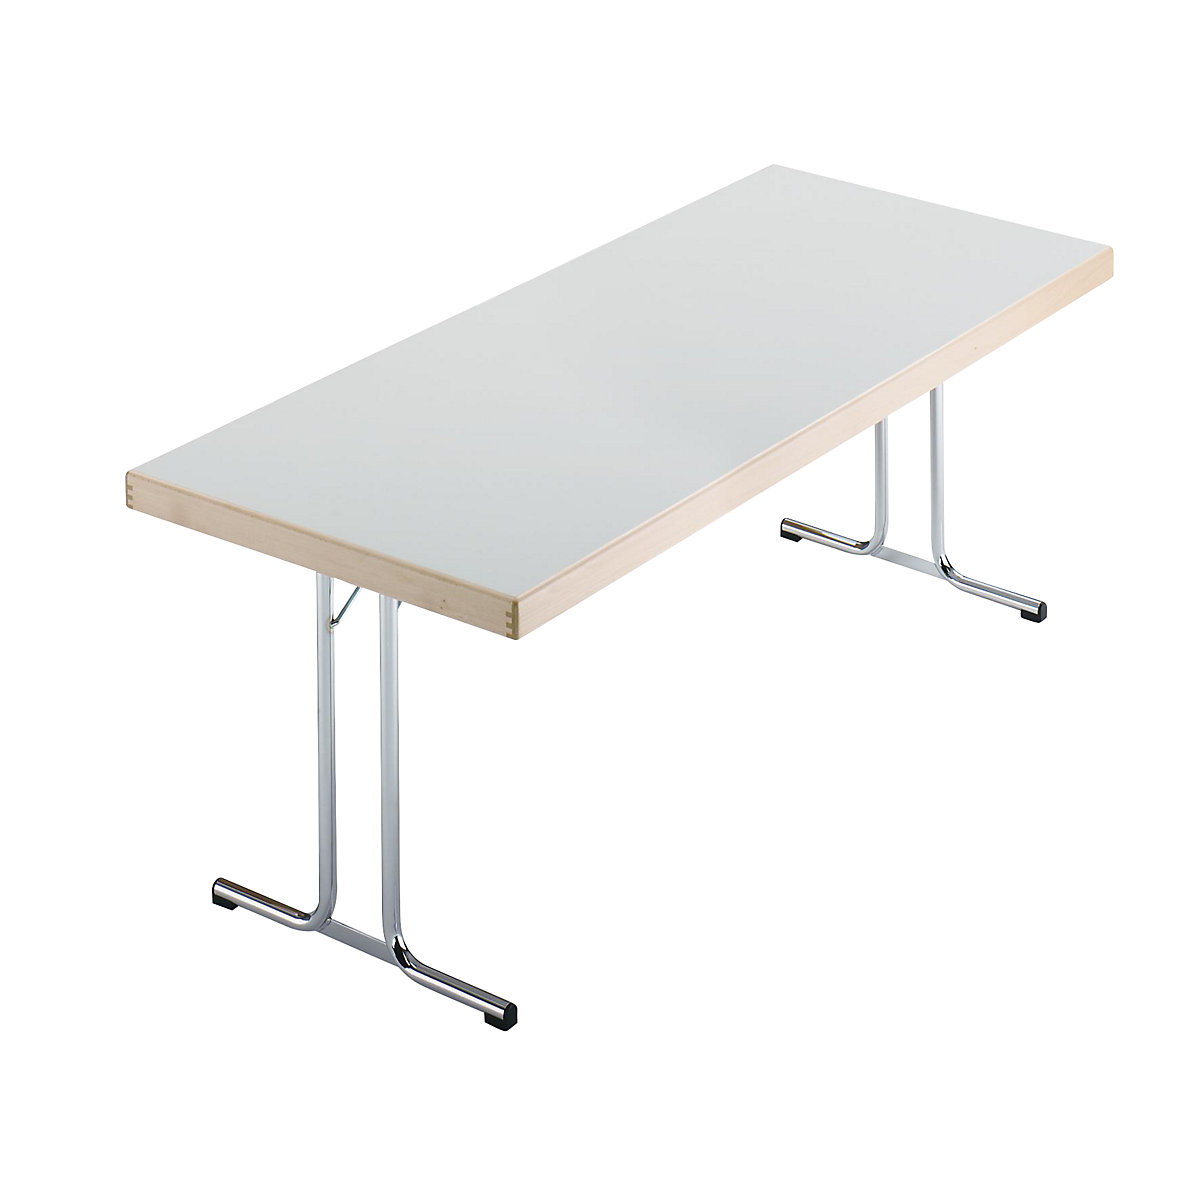 Folding table, double T-foot stand, 1500x800 mm, chrome-plated frame, light grey panel-11